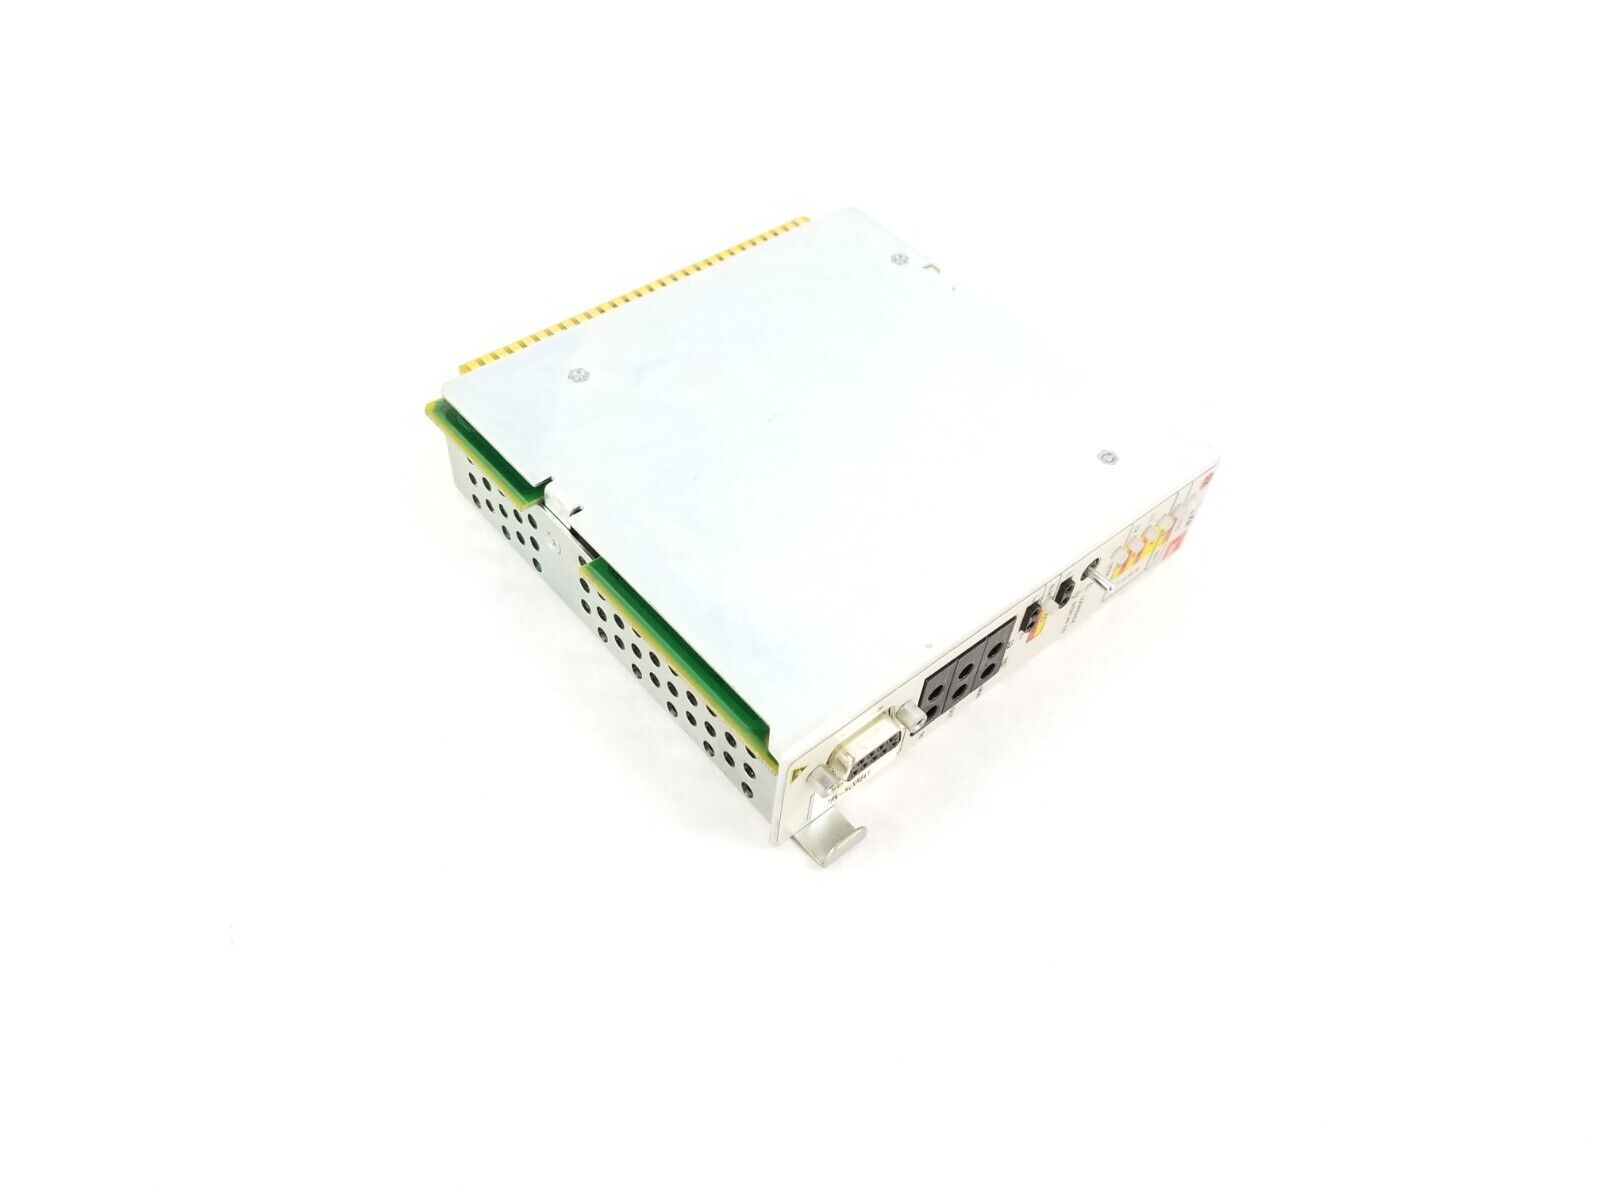 ADC SPX-HLXRE41 2X DS1 Module 1048458 REV 12